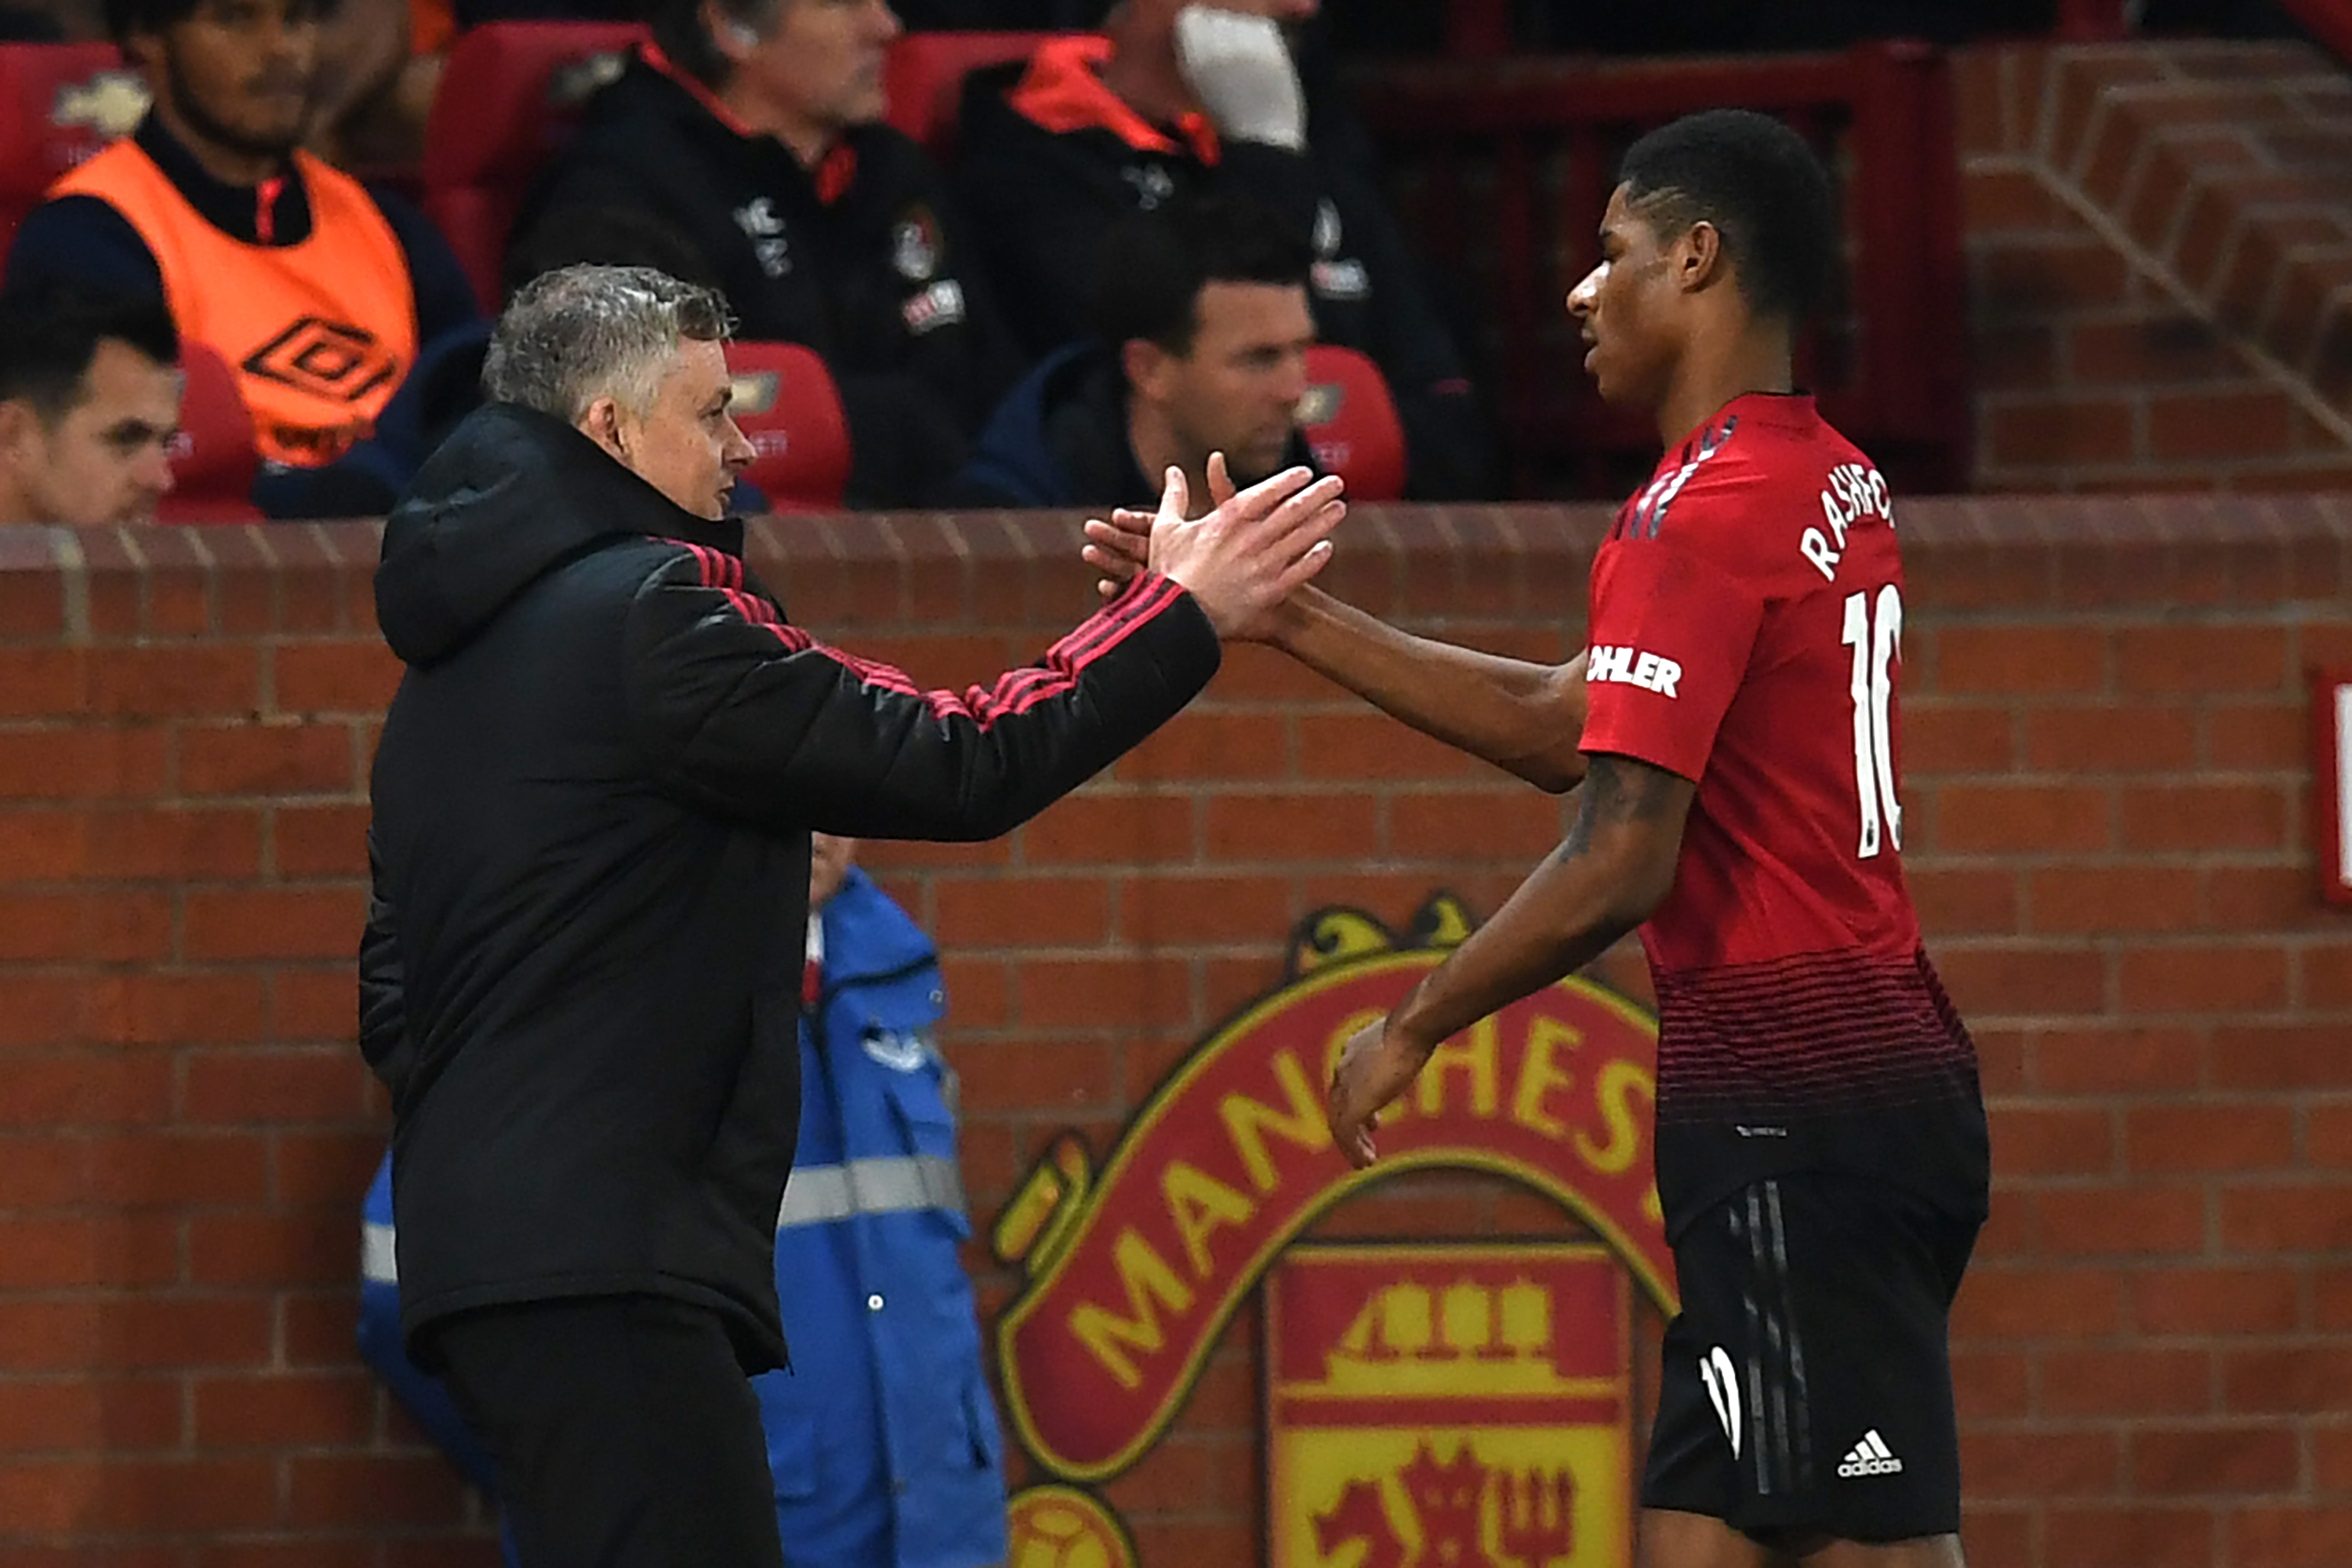 Manchester United's English striker Marcus Rashford (R) shakes hands with Manchester United's Norwegian caretaker manager Ole Gunnar Solskjaer (L) after being substituted during the English Premier League football match between Manchester United and Bournemouth at Old Trafford in Manchester, north west England, on December 30, 2018. (Photo by Paul ELLIS / AFP) / RESTRICTED TO EDITORIAL USE. No use with unauthorized audio, video, data, fixture lists, club/league logos or 'live' services. Online in-match use limited to 120 images. An additional 40 images may be used in extra time. No video emulation. Social media in-match use limited to 120 images. An additional 40 images may be used in extra time. No use in betting publications, games or single club/league/player publications. /         (Photo credit should read PAUL ELLIS/AFP/Getty Images)